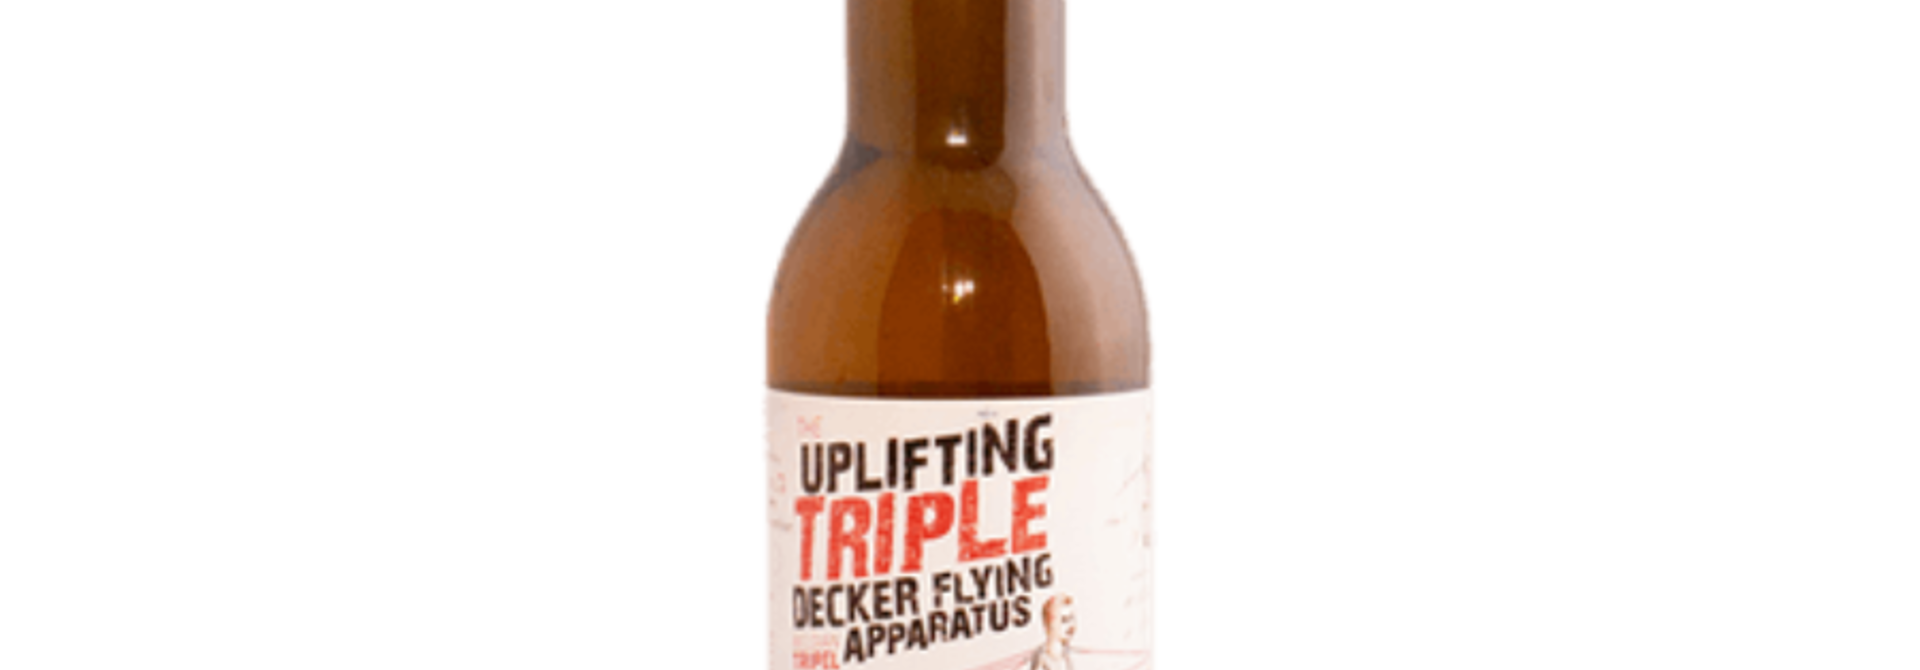 Strieper Craft Beer The Uplifting Triple Decker Flying Apparatus 33cl 8,5%